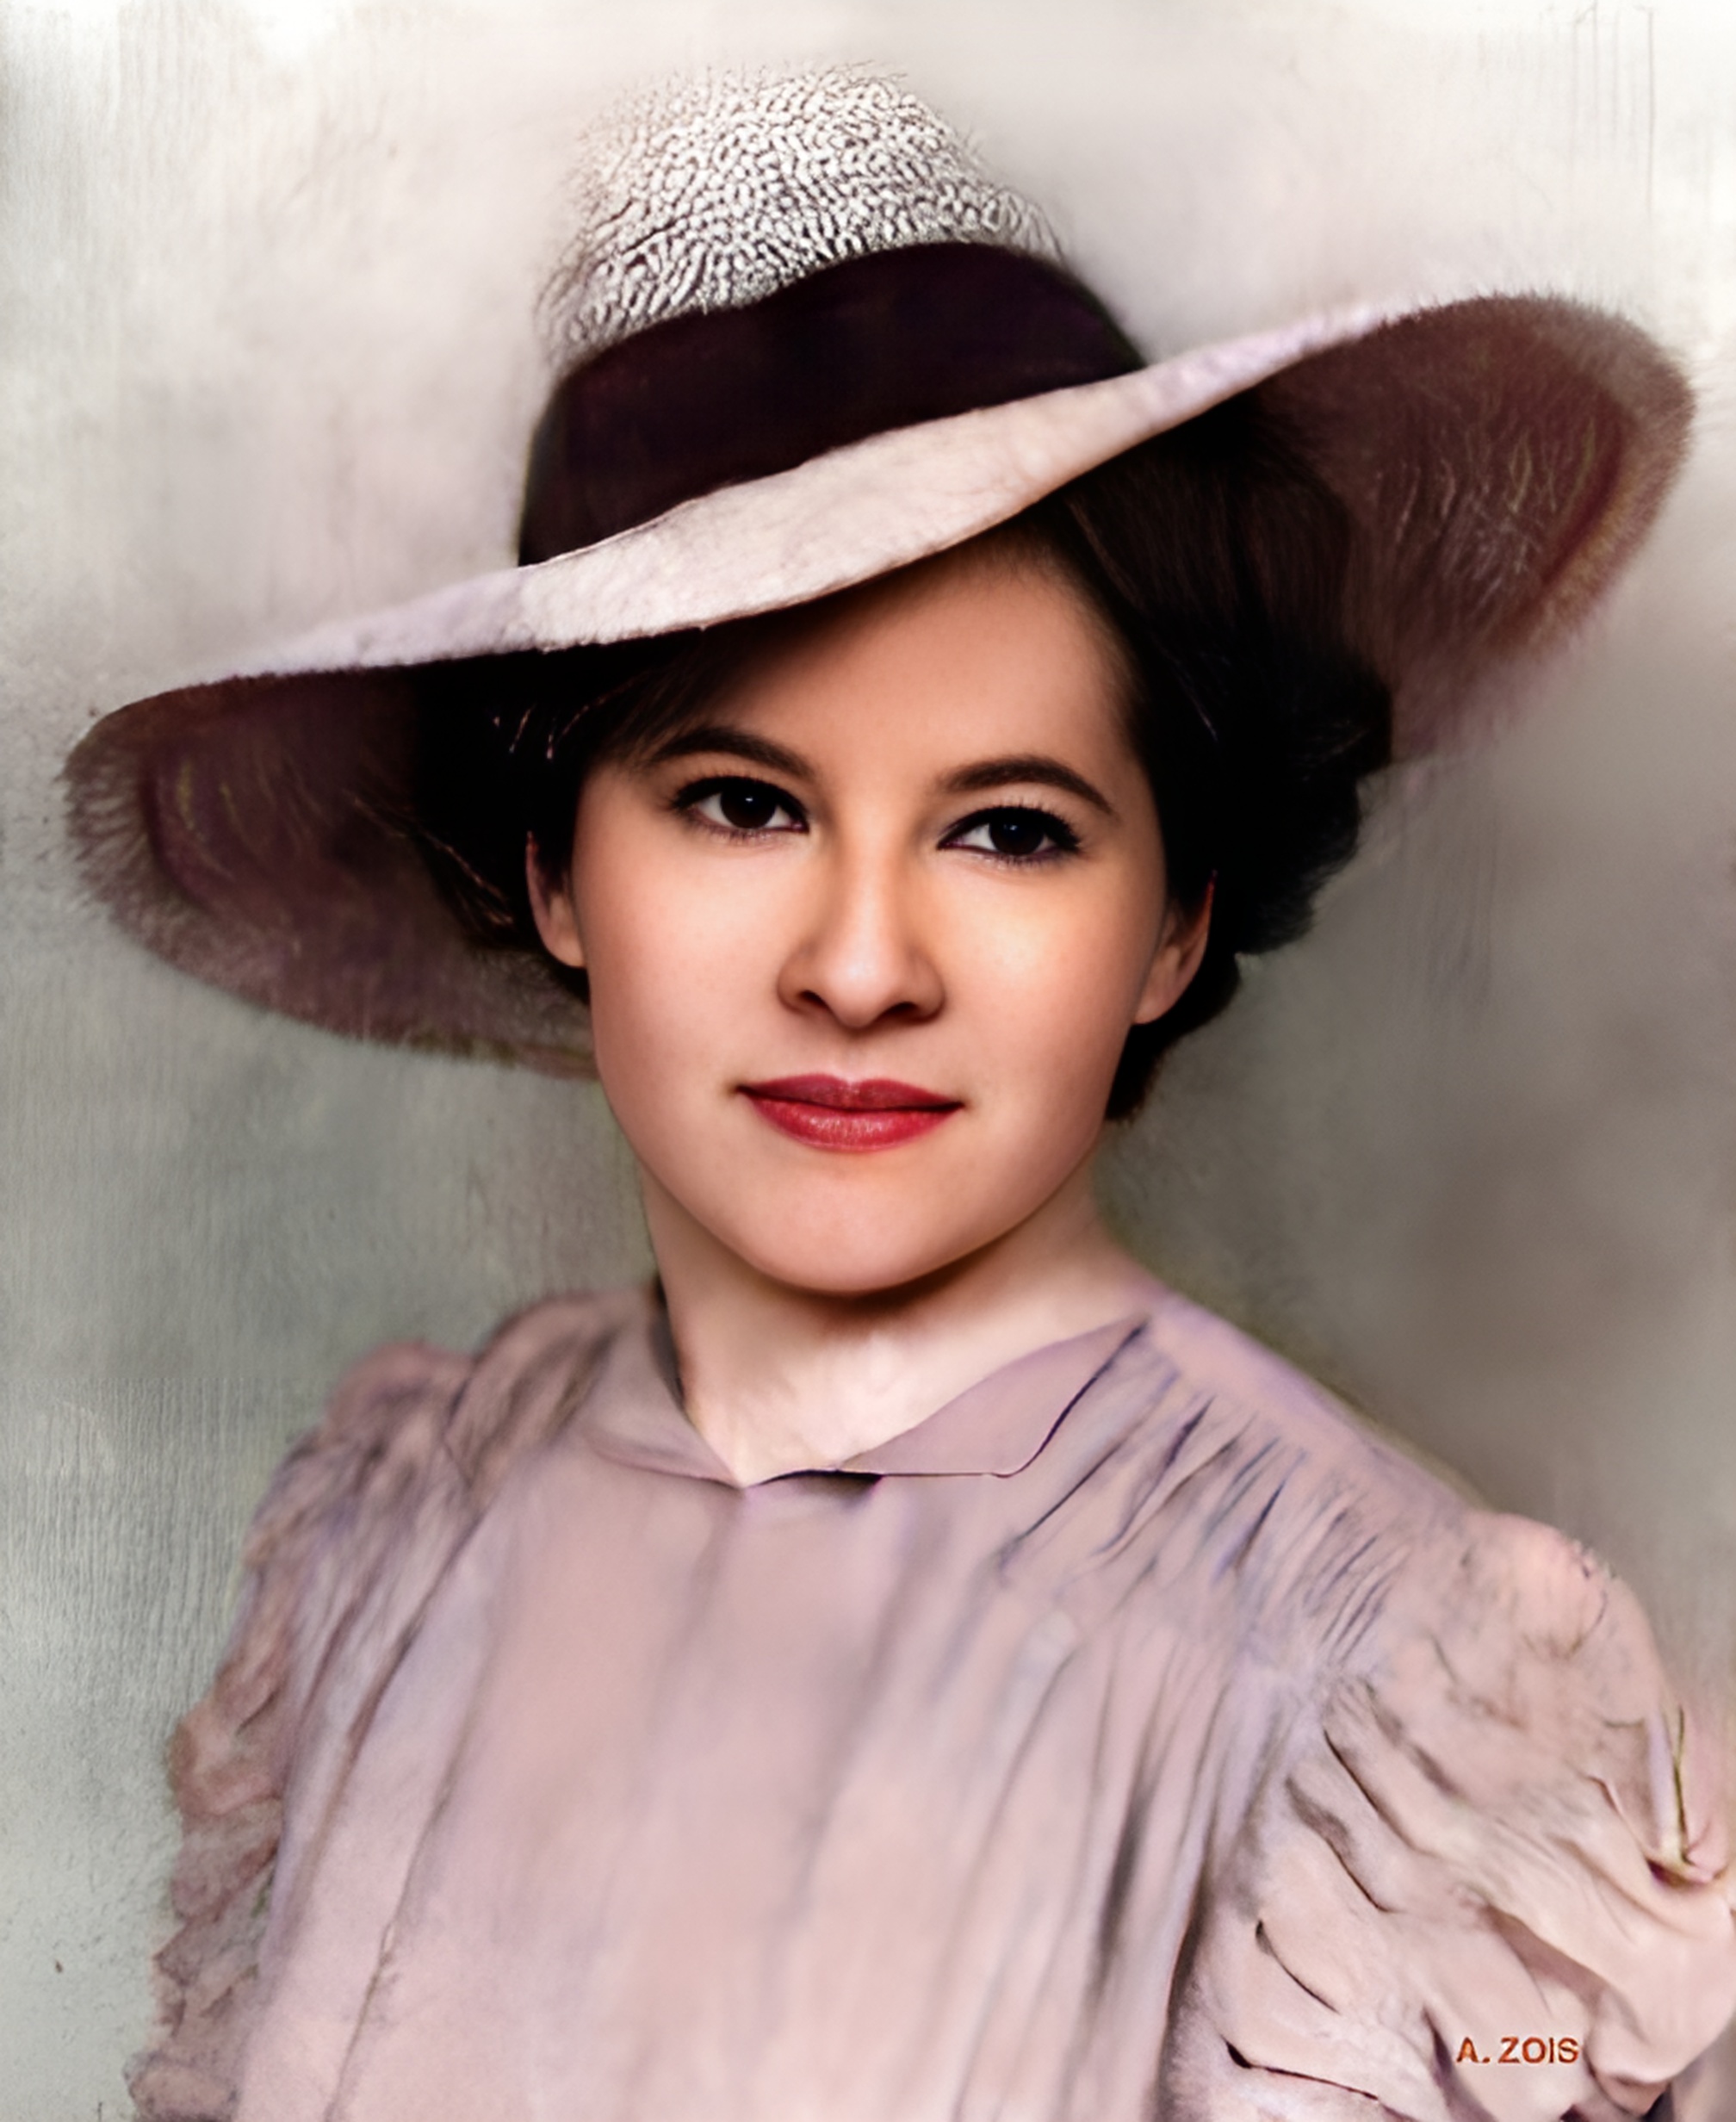  Jeanne Shaw. Image colourized by Anthony Zois.